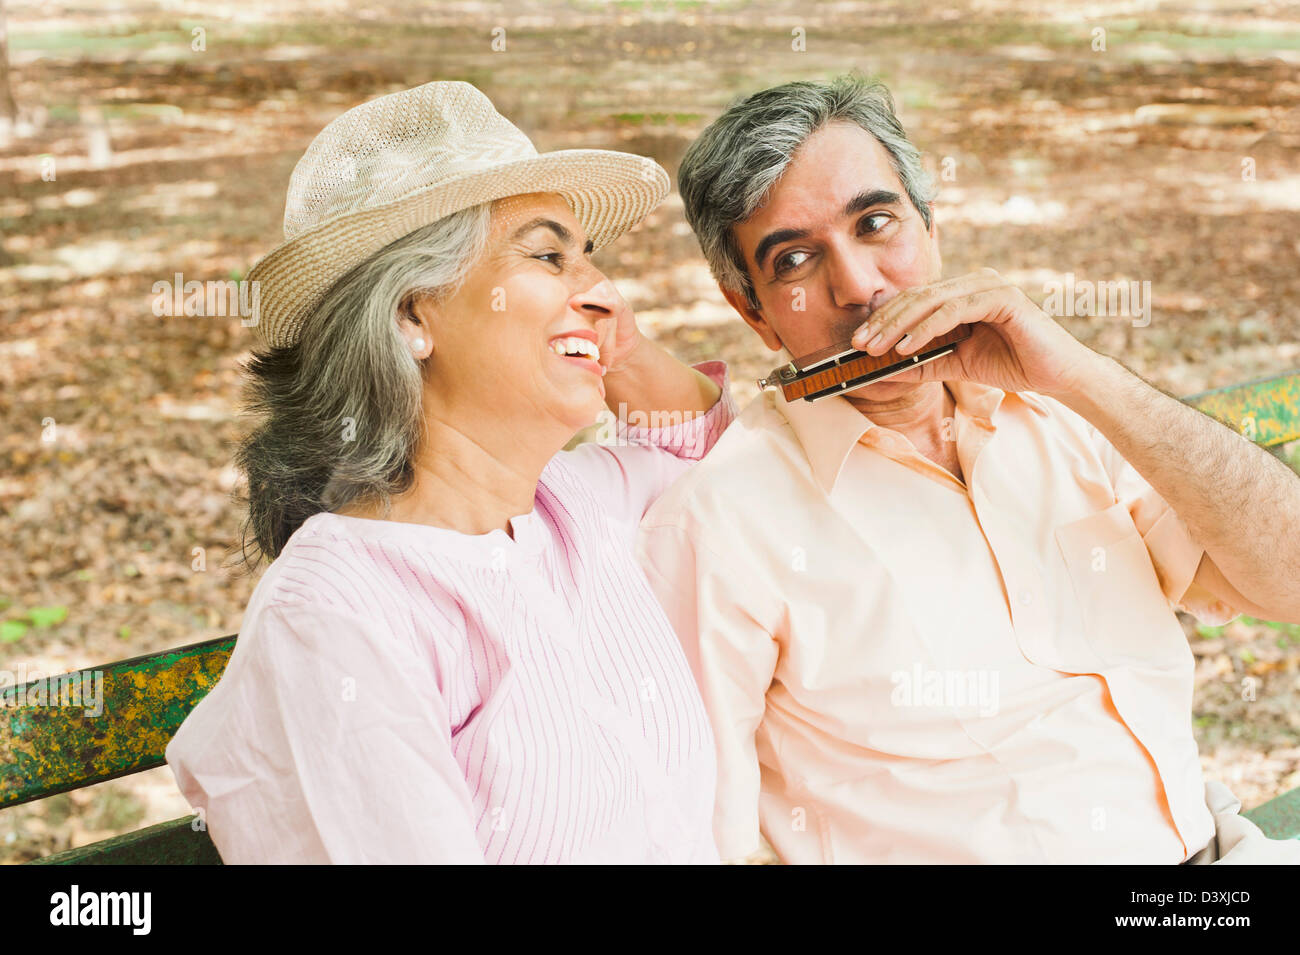 Man playing a harmonica with his wife sitting beside him and smiling, Lodi Gardens, New Delhi, India Stock Photo